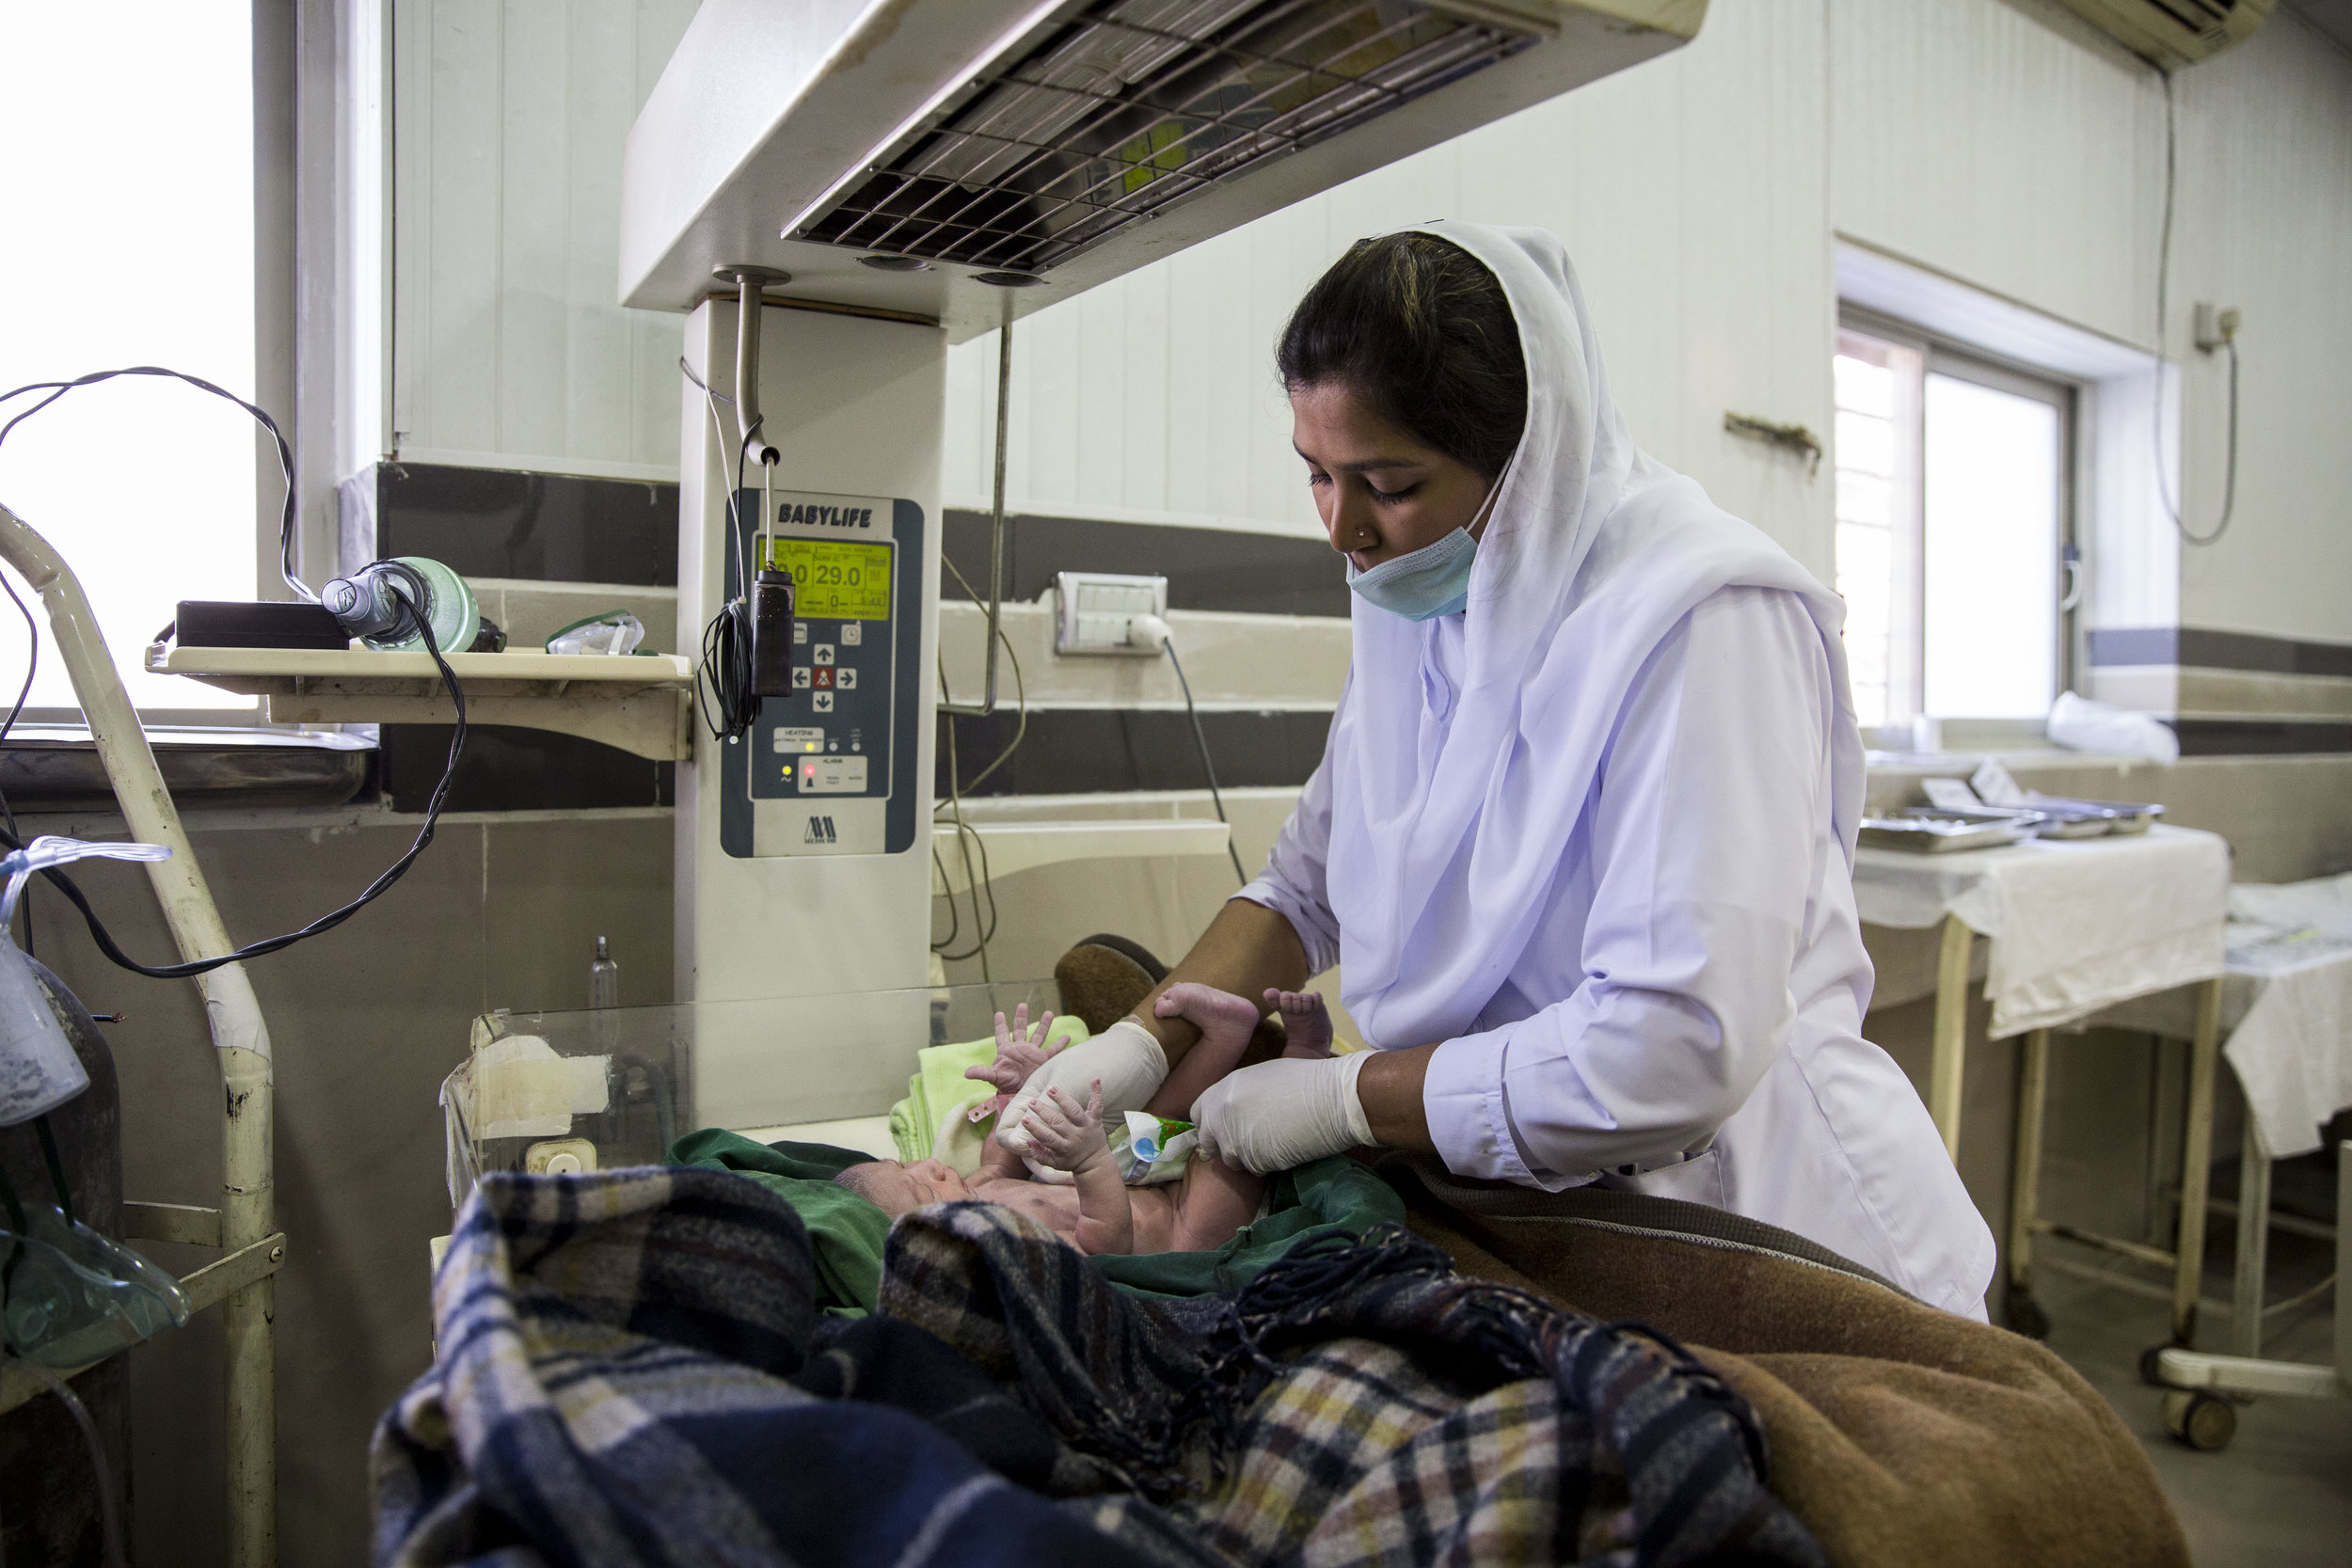 Staff Sehar Kanwal clothes the newborn babies inside the labour room at Holy Family Hospital on March 6, 2019 in Rawalpindi, Pakistan. Saiyna Bashir © Wellcome Trust